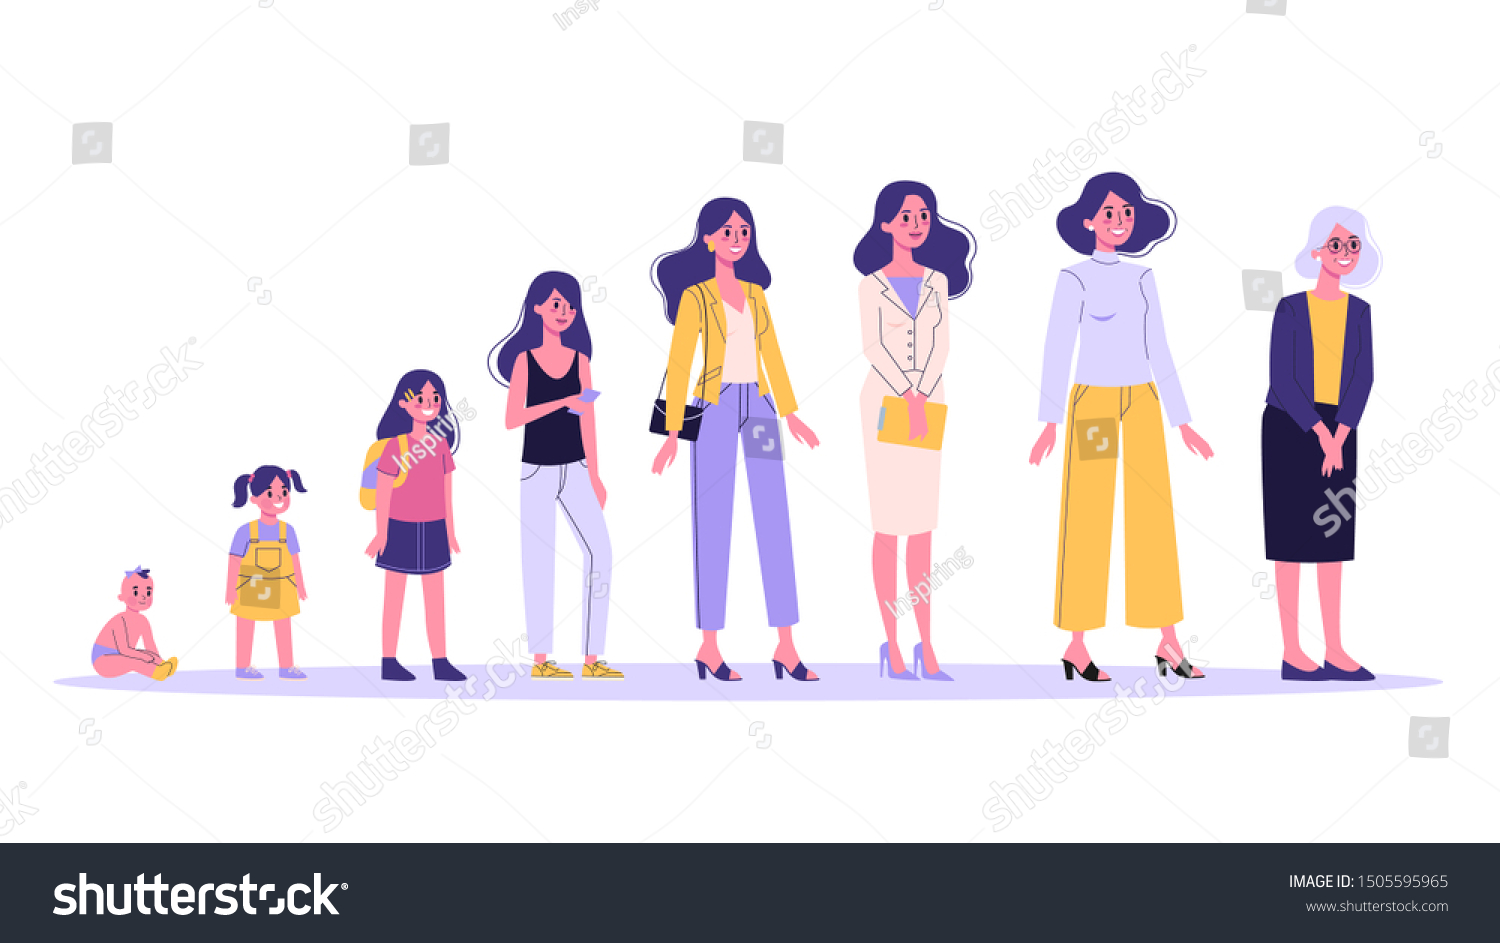 SVG of Woman in different age. From child to old person. Teenager, adult and baby generation. Aging process. Isolated vector illustration in cartoon style svg